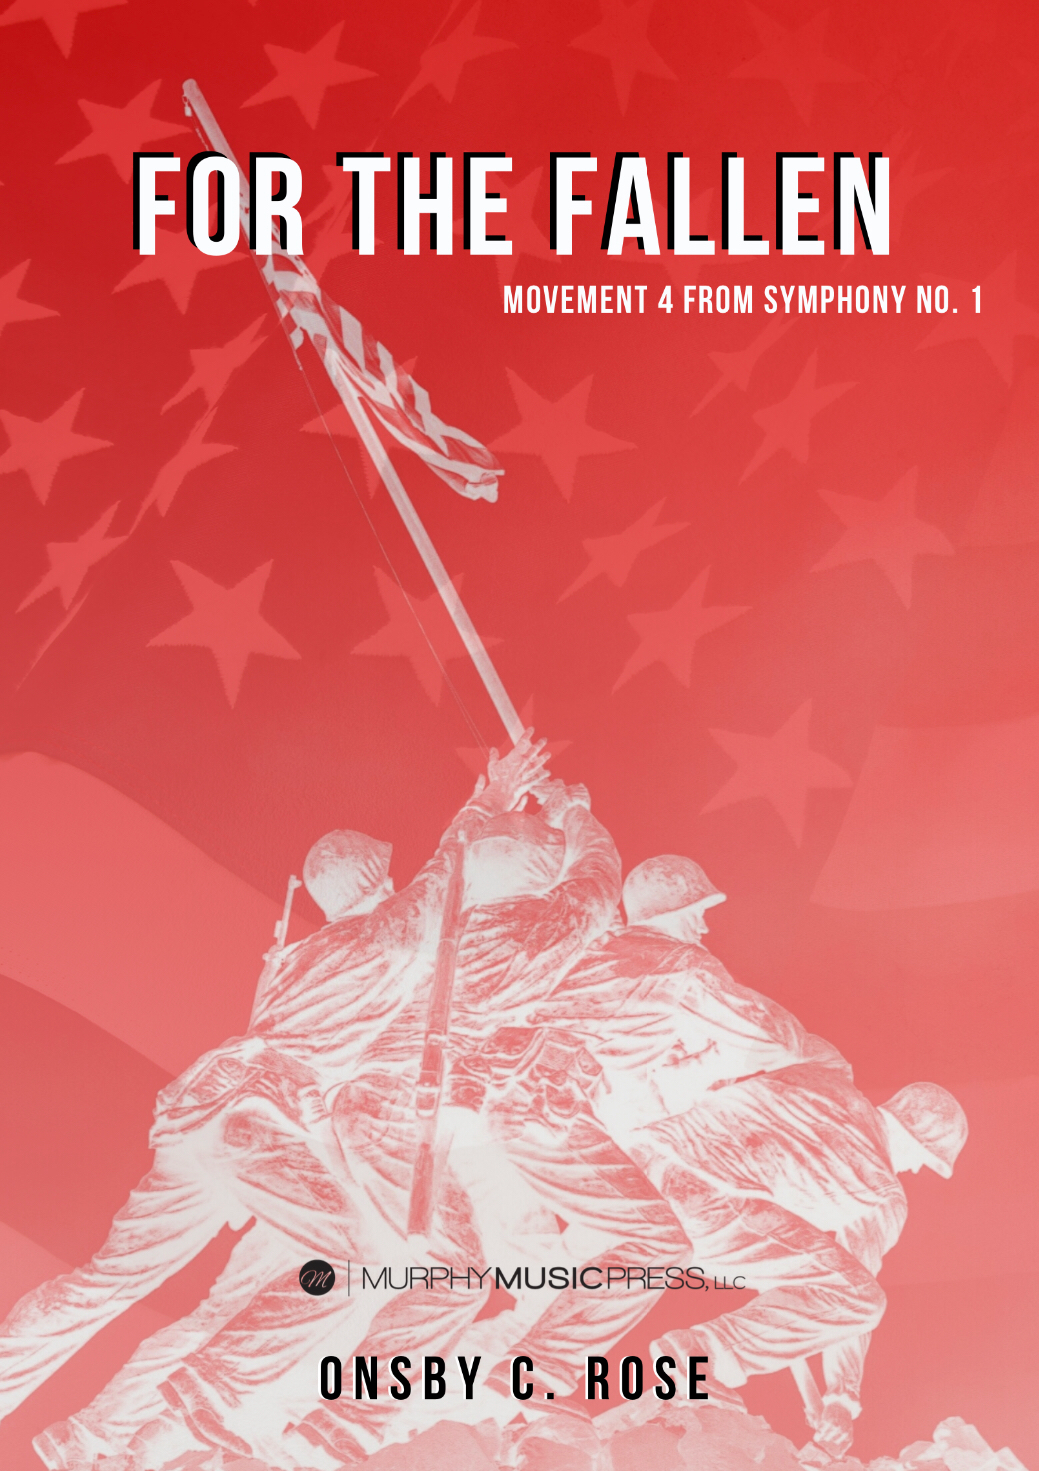 For The Fallen by Onsby C. Rose